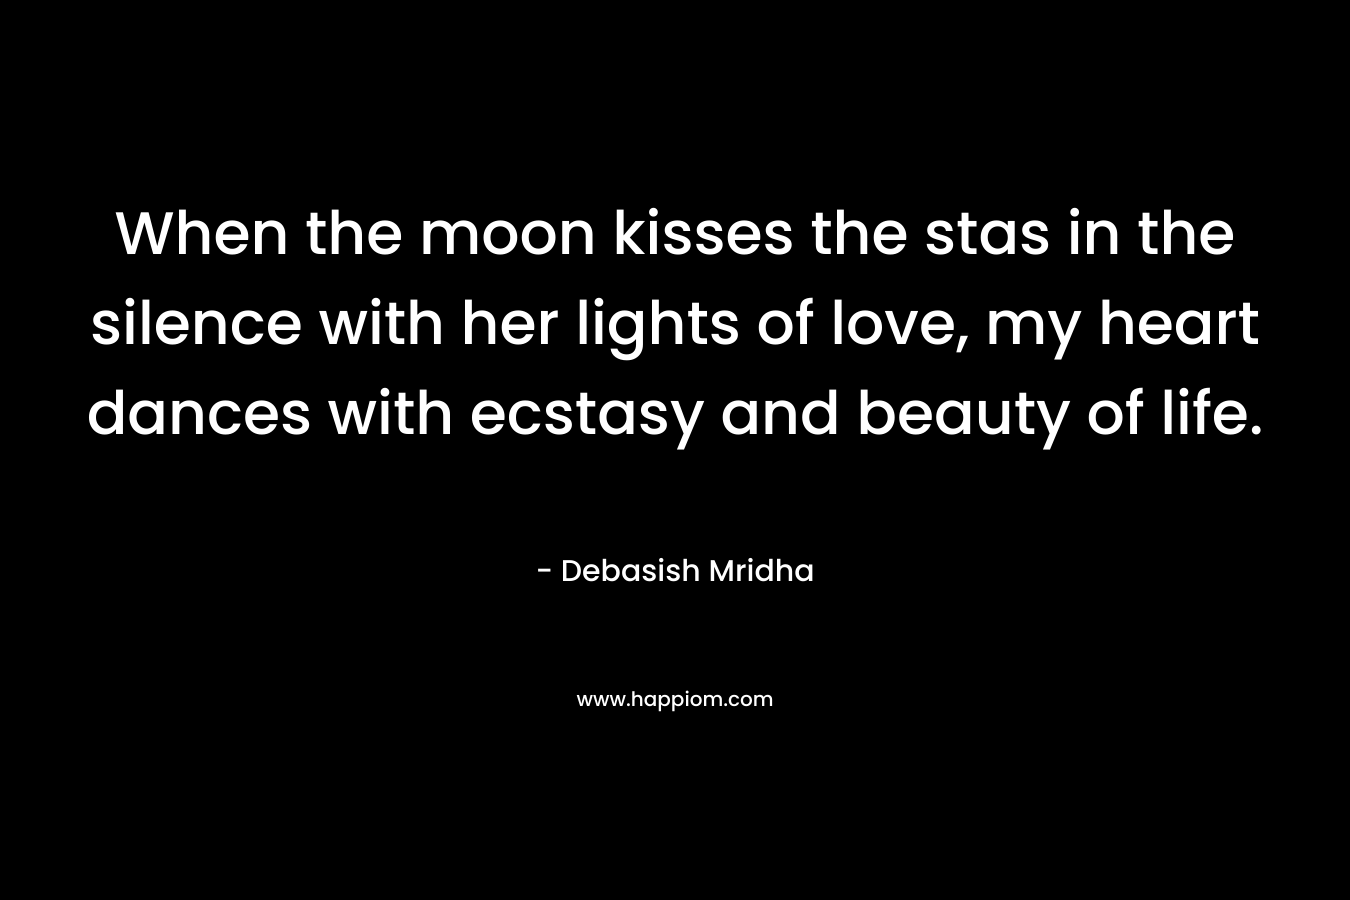 When the moon kisses the stas in the silence with her lights of love, my heart dances with ecstasy and beauty of life.